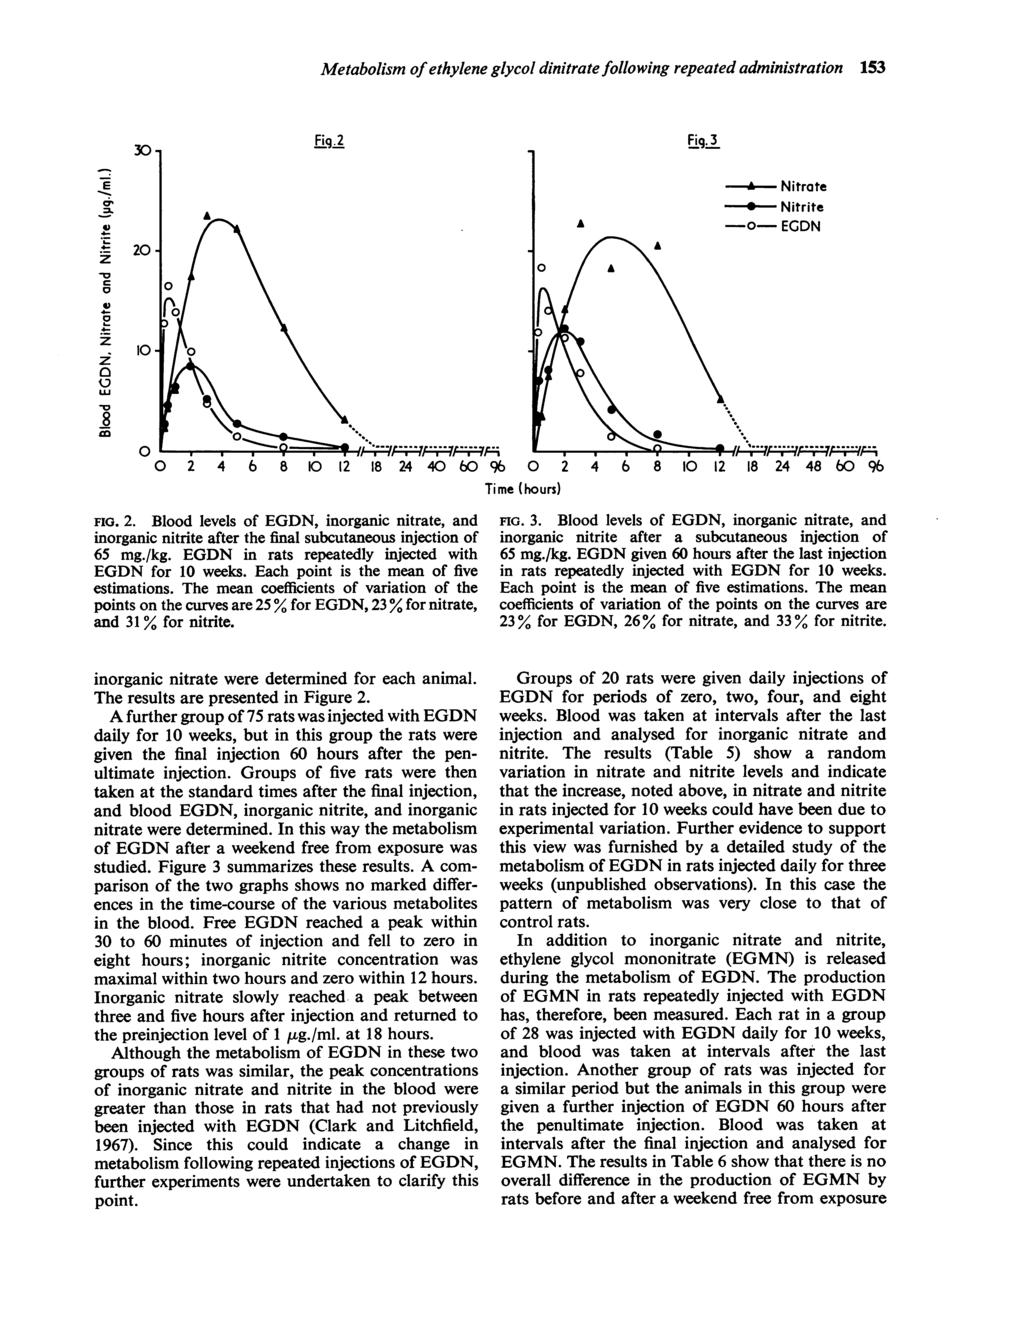 4'- z 0 4, S0 z 0 LU 30 20 10 0 Metabolism ofethylene glycol dinitrate following repeated administration 153 Fig. 2 0 2 4 6 8 10 12 18 24 40 60 96 0 Time (hours FIG. 2. Blood levels of EGDN, inorganic nitrate, and inorganic nitrite after the final subcutaneous injection of 65 mg.